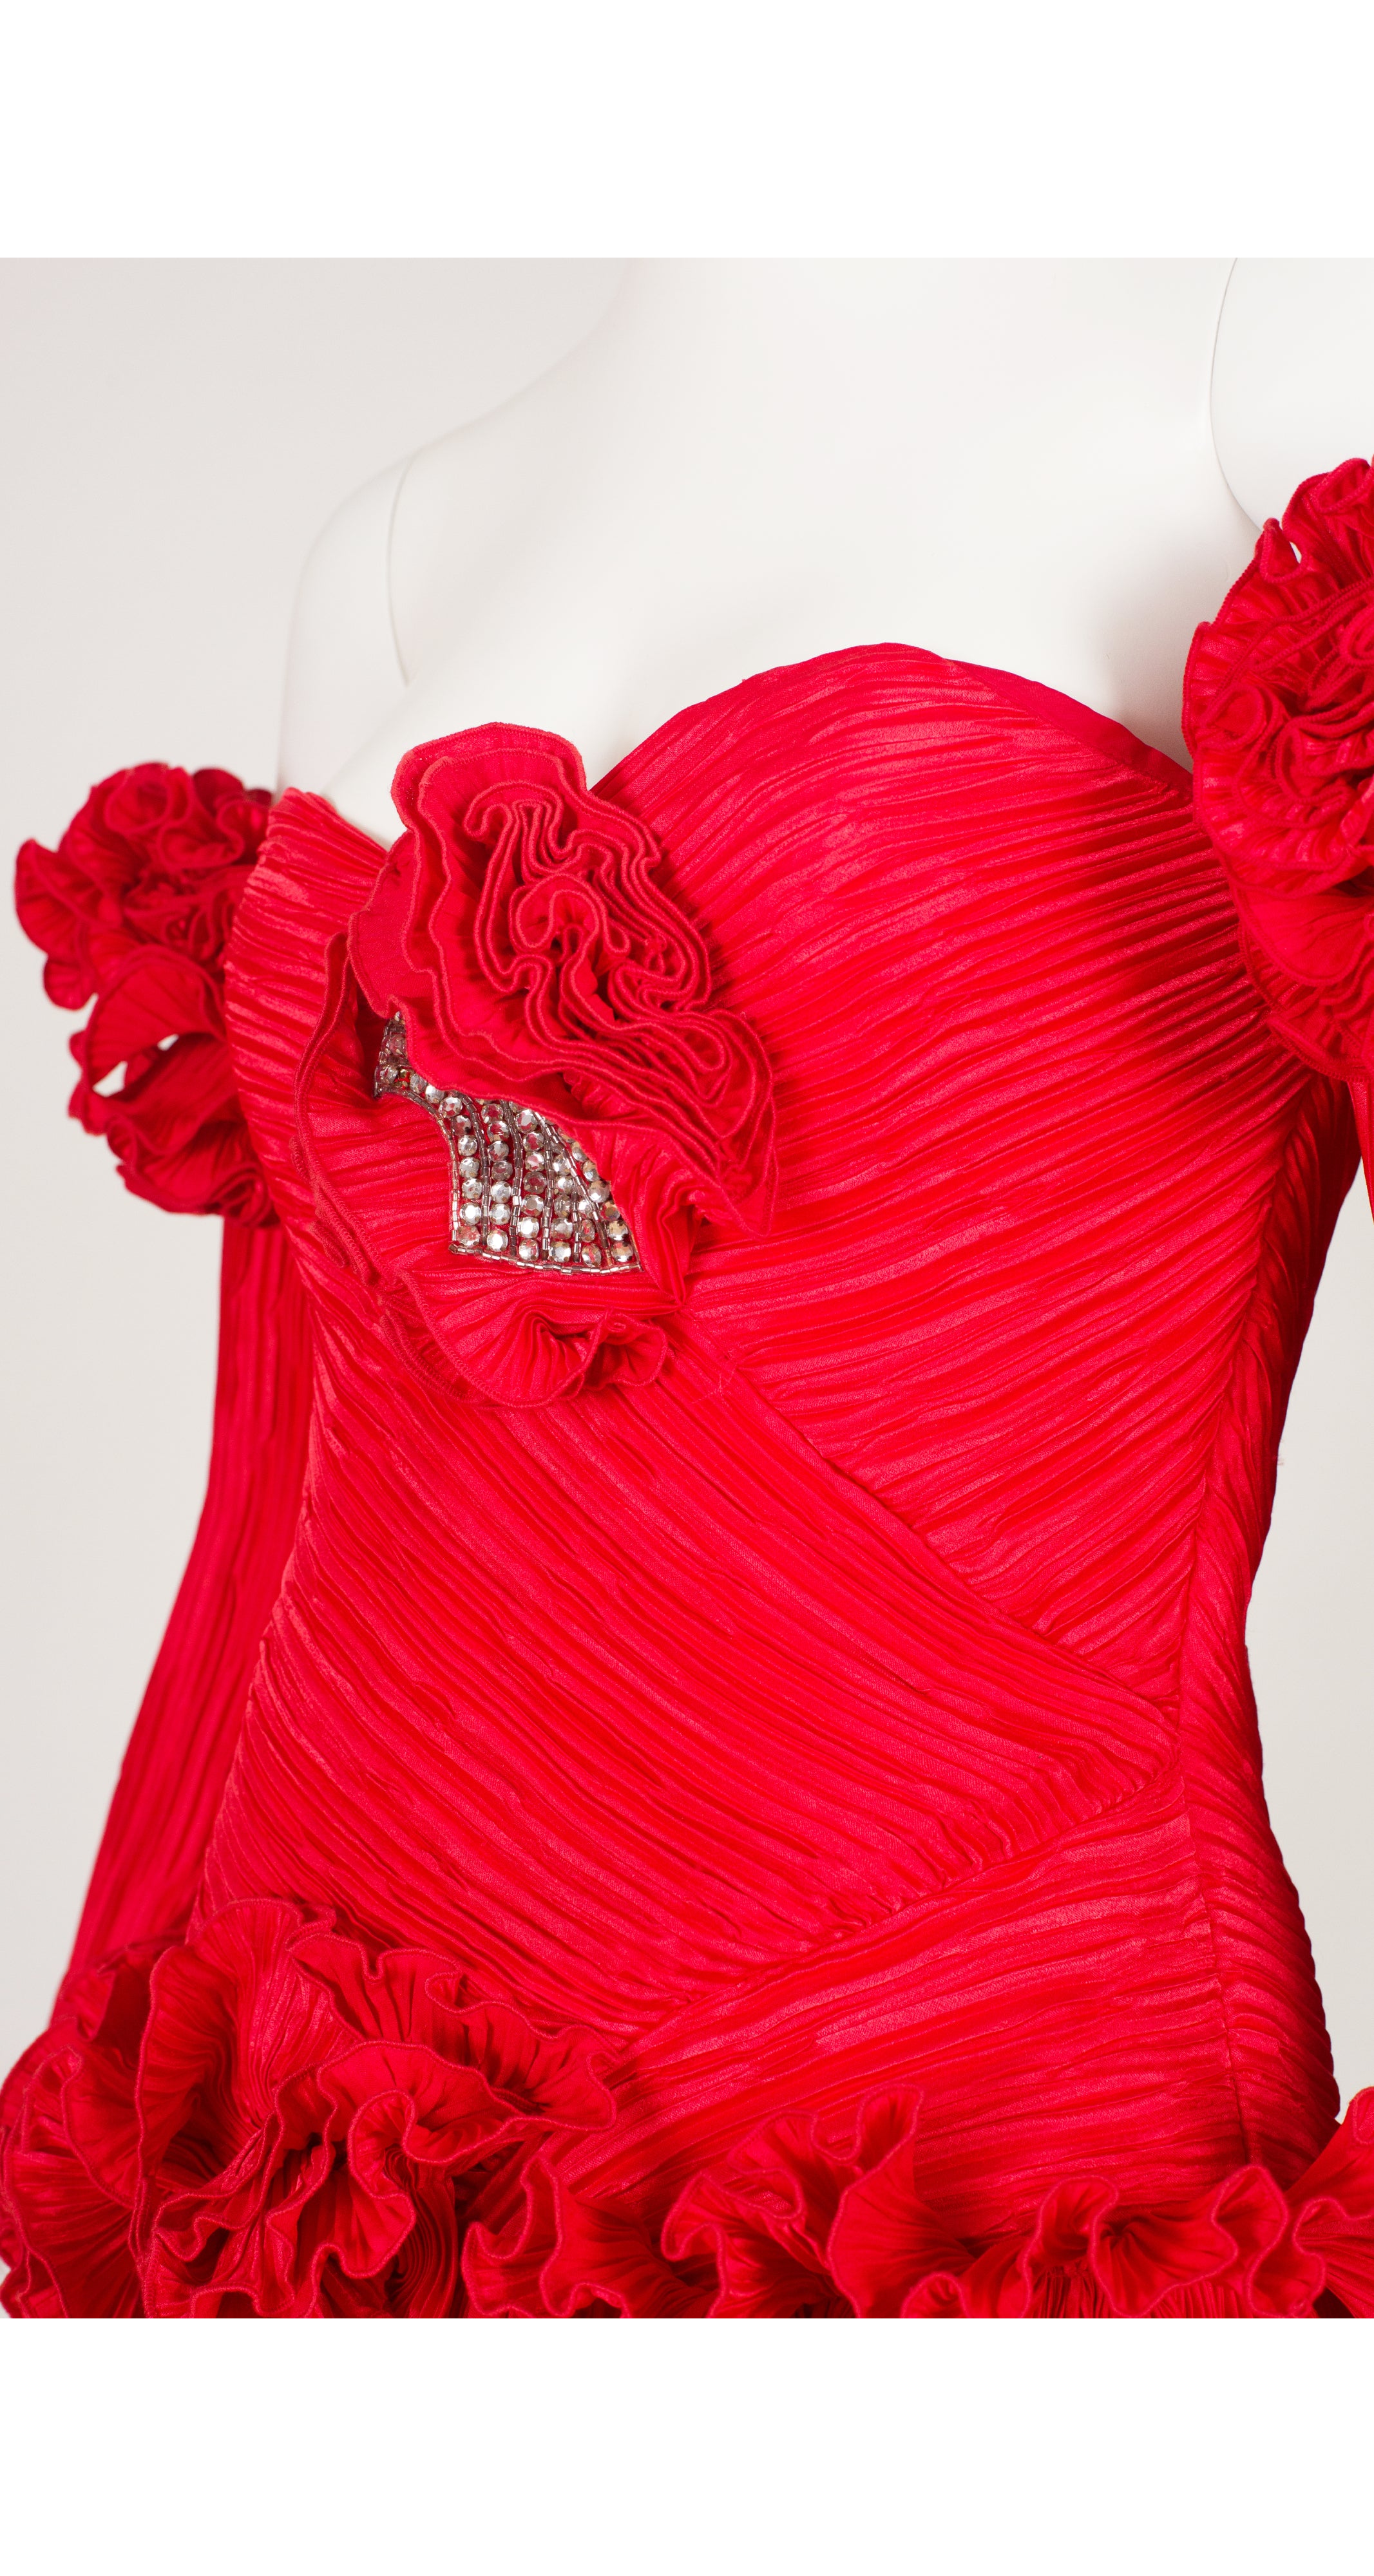 1980s NWT Red Off-the-Shoulder Ruffle Evening Dress